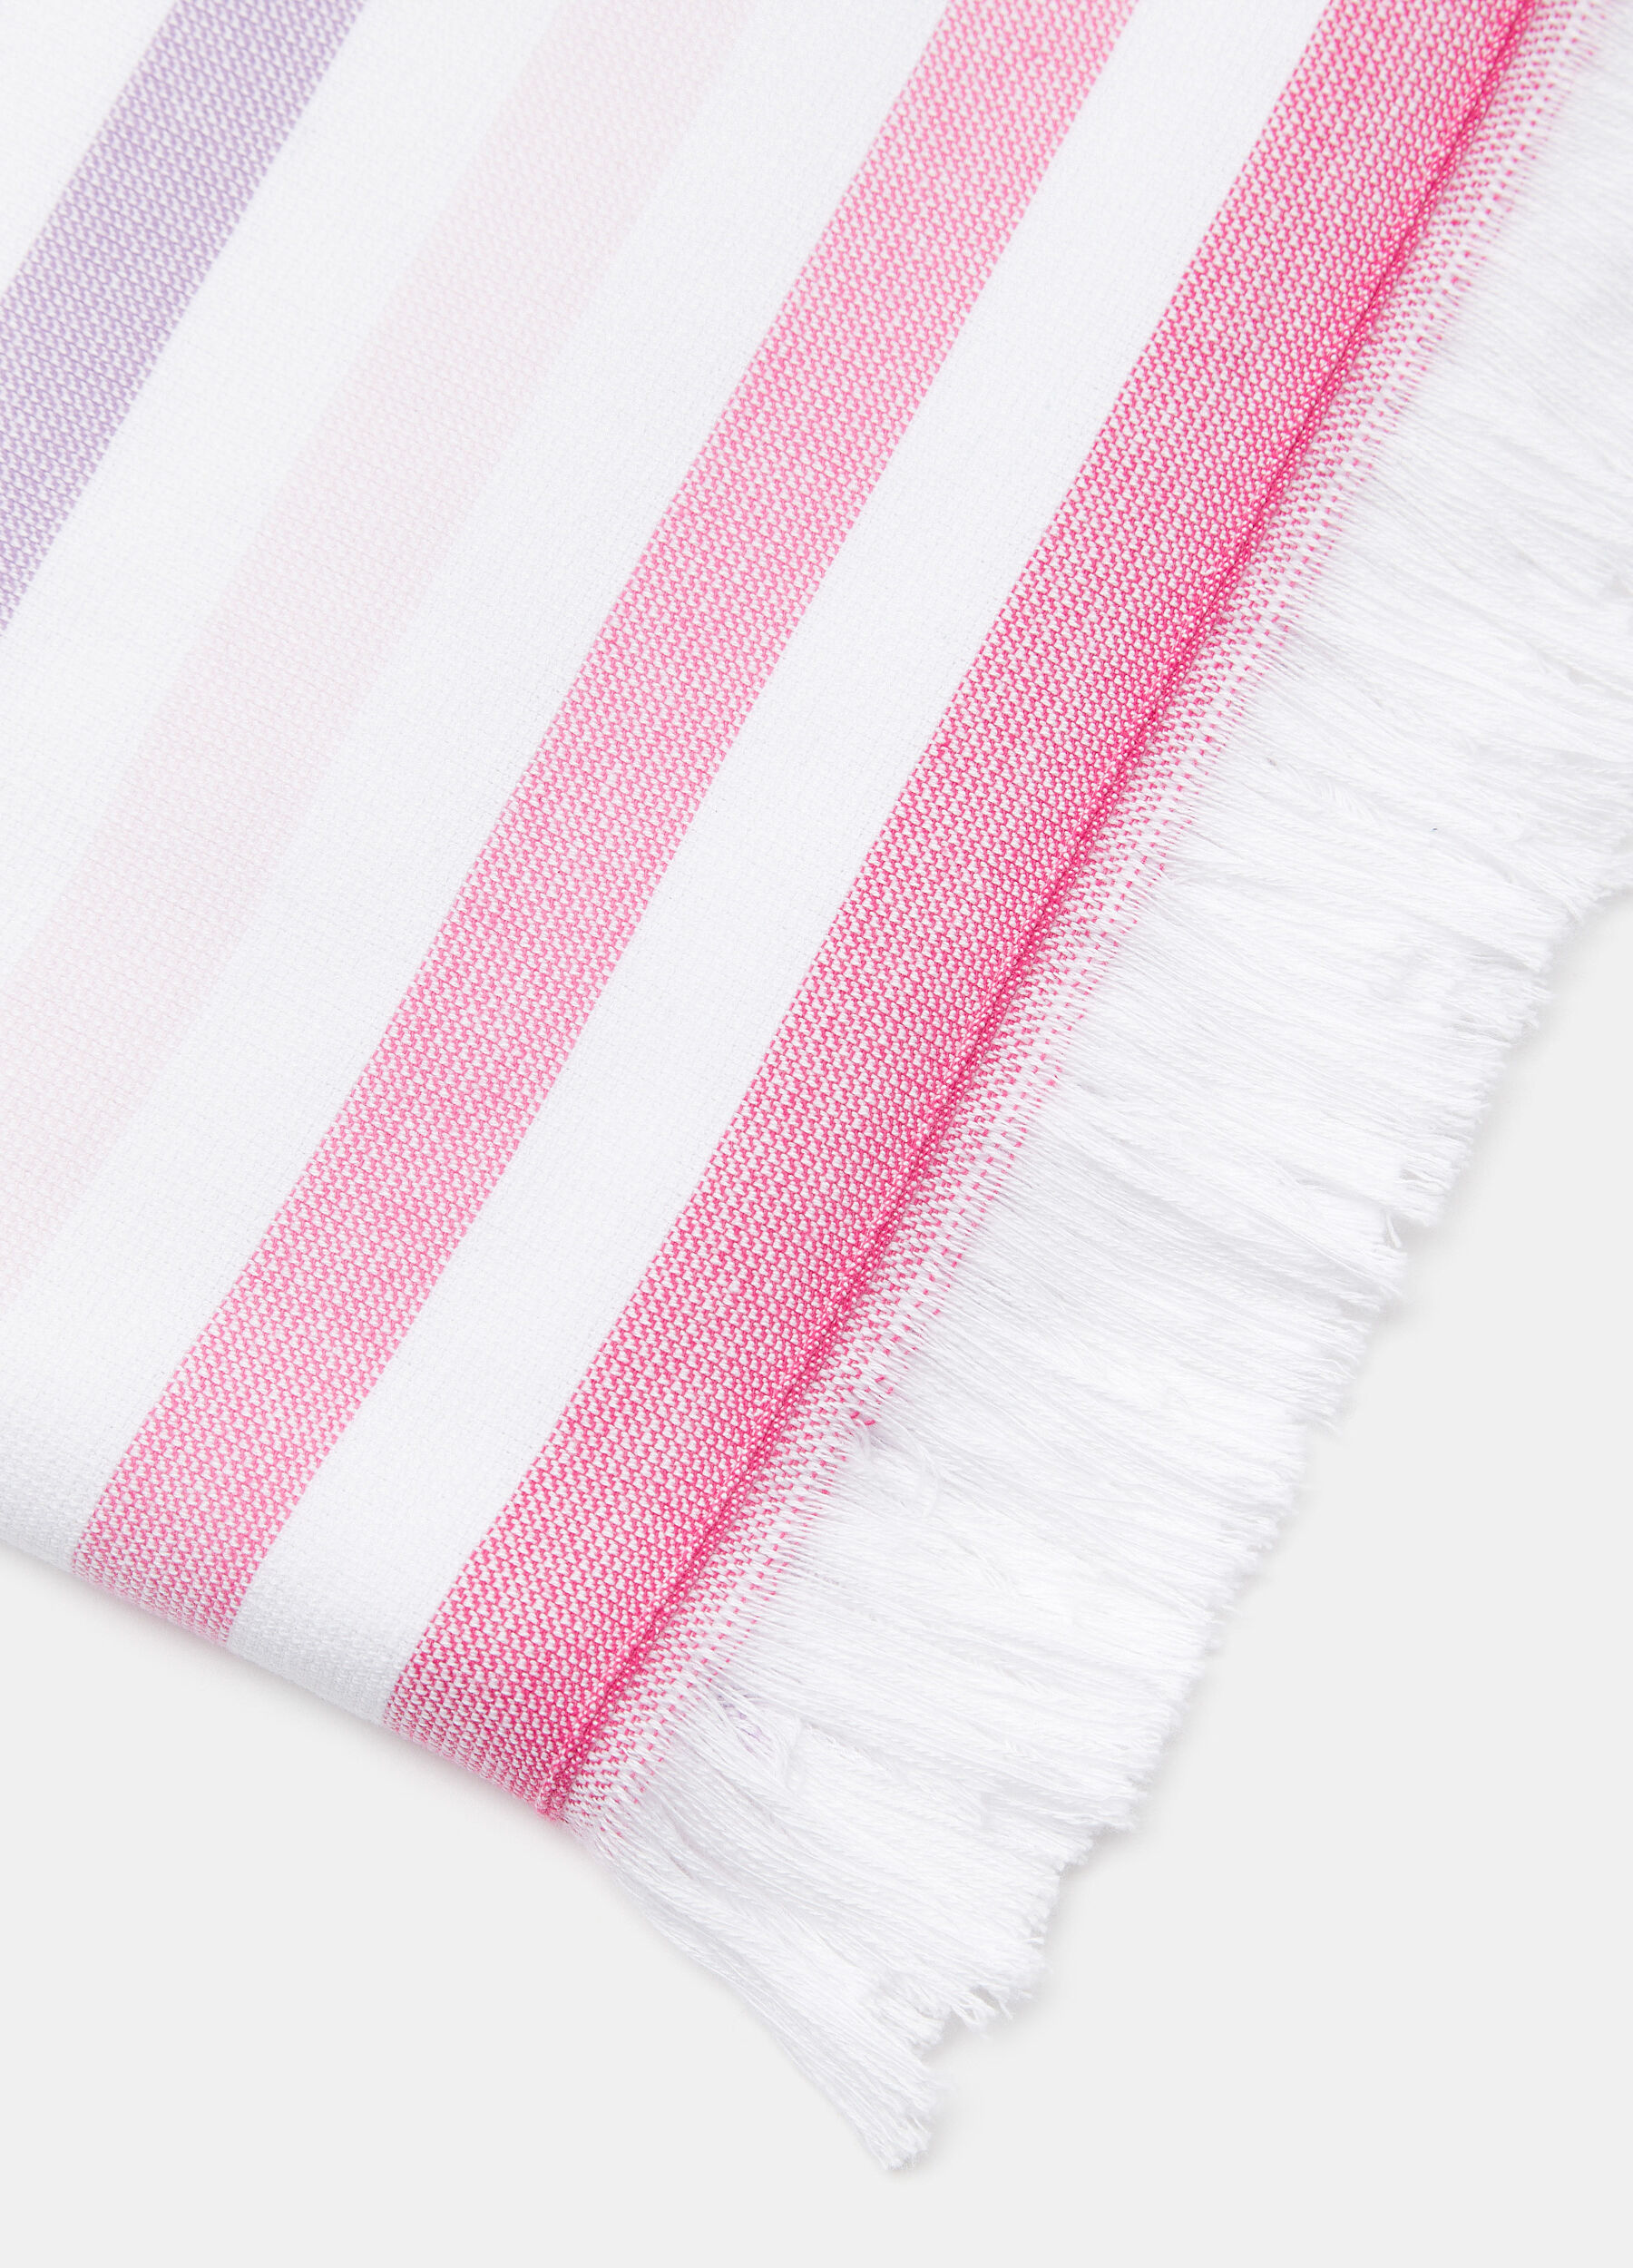 100% cotton beach towel with fringed trim.